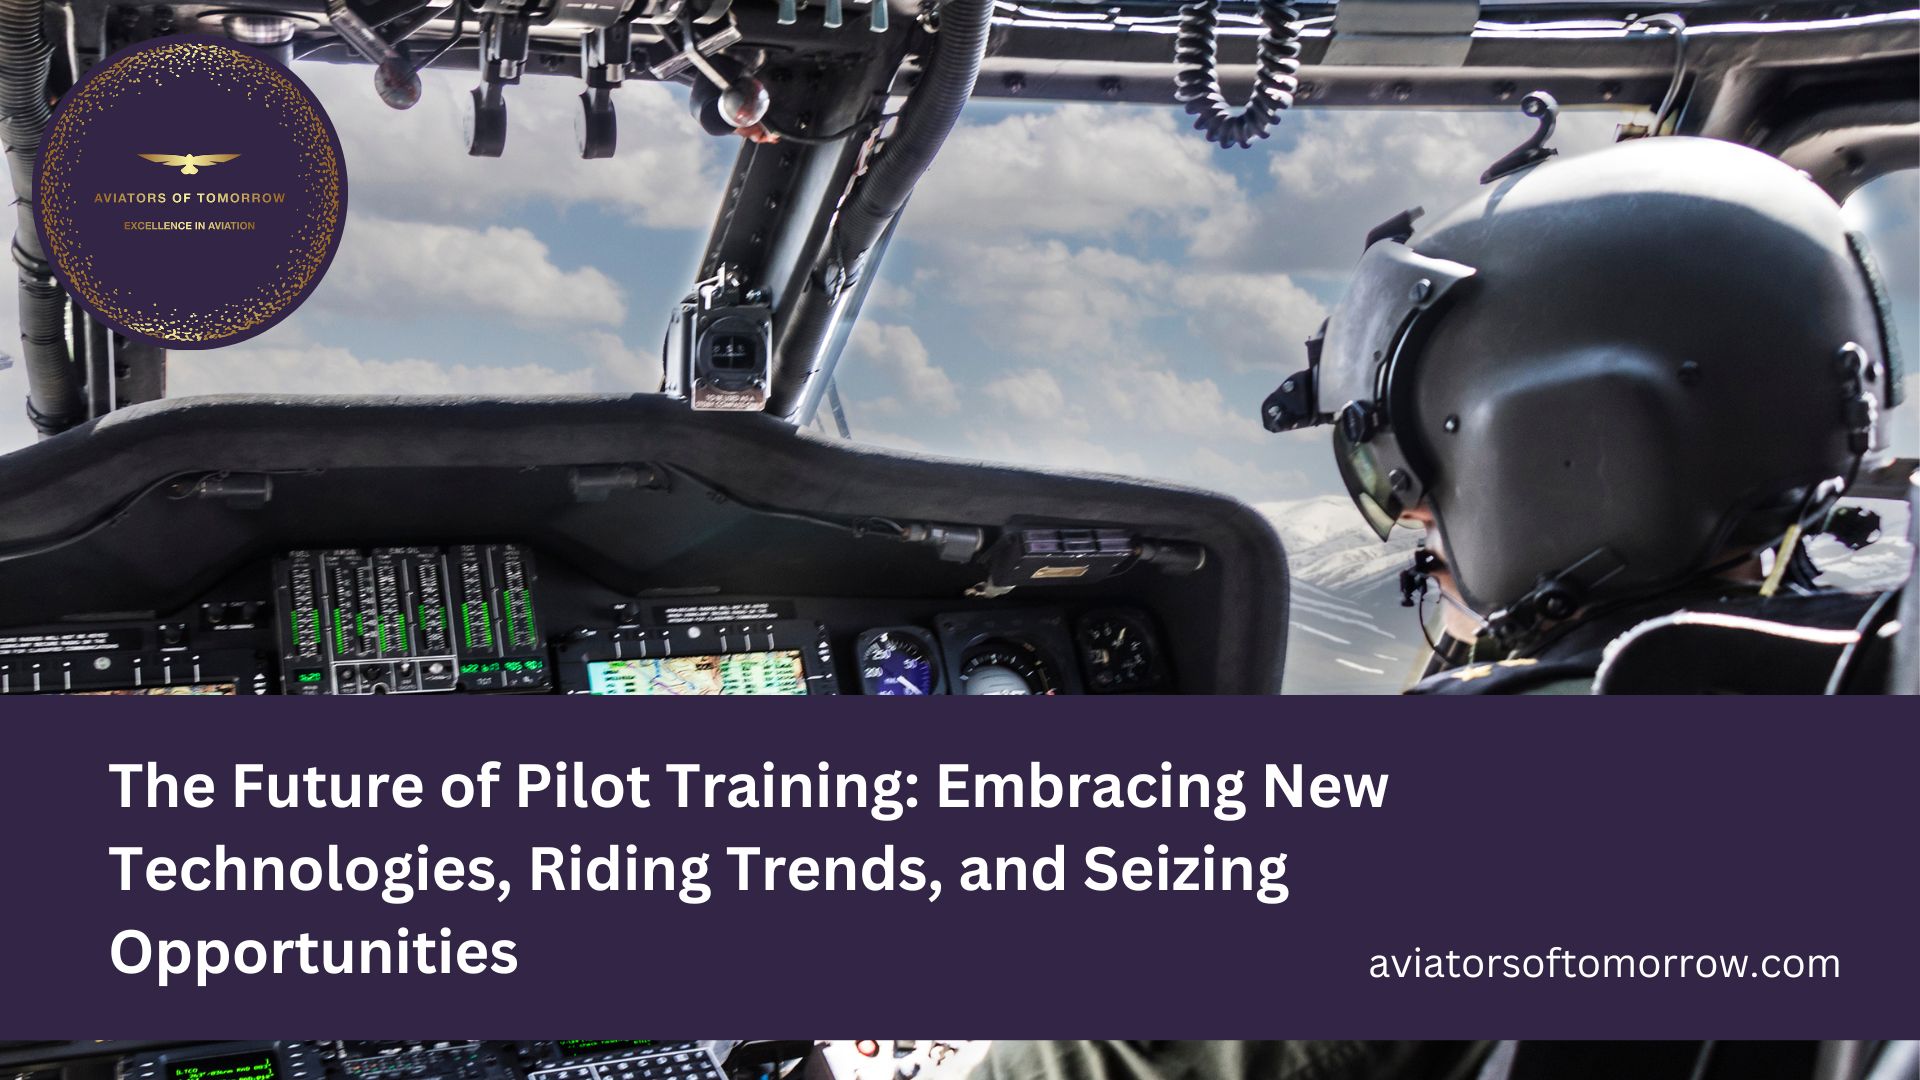 The Future of Pilot Training: Embracing New Technologies, Riding Trends, and Seizing Opportunities